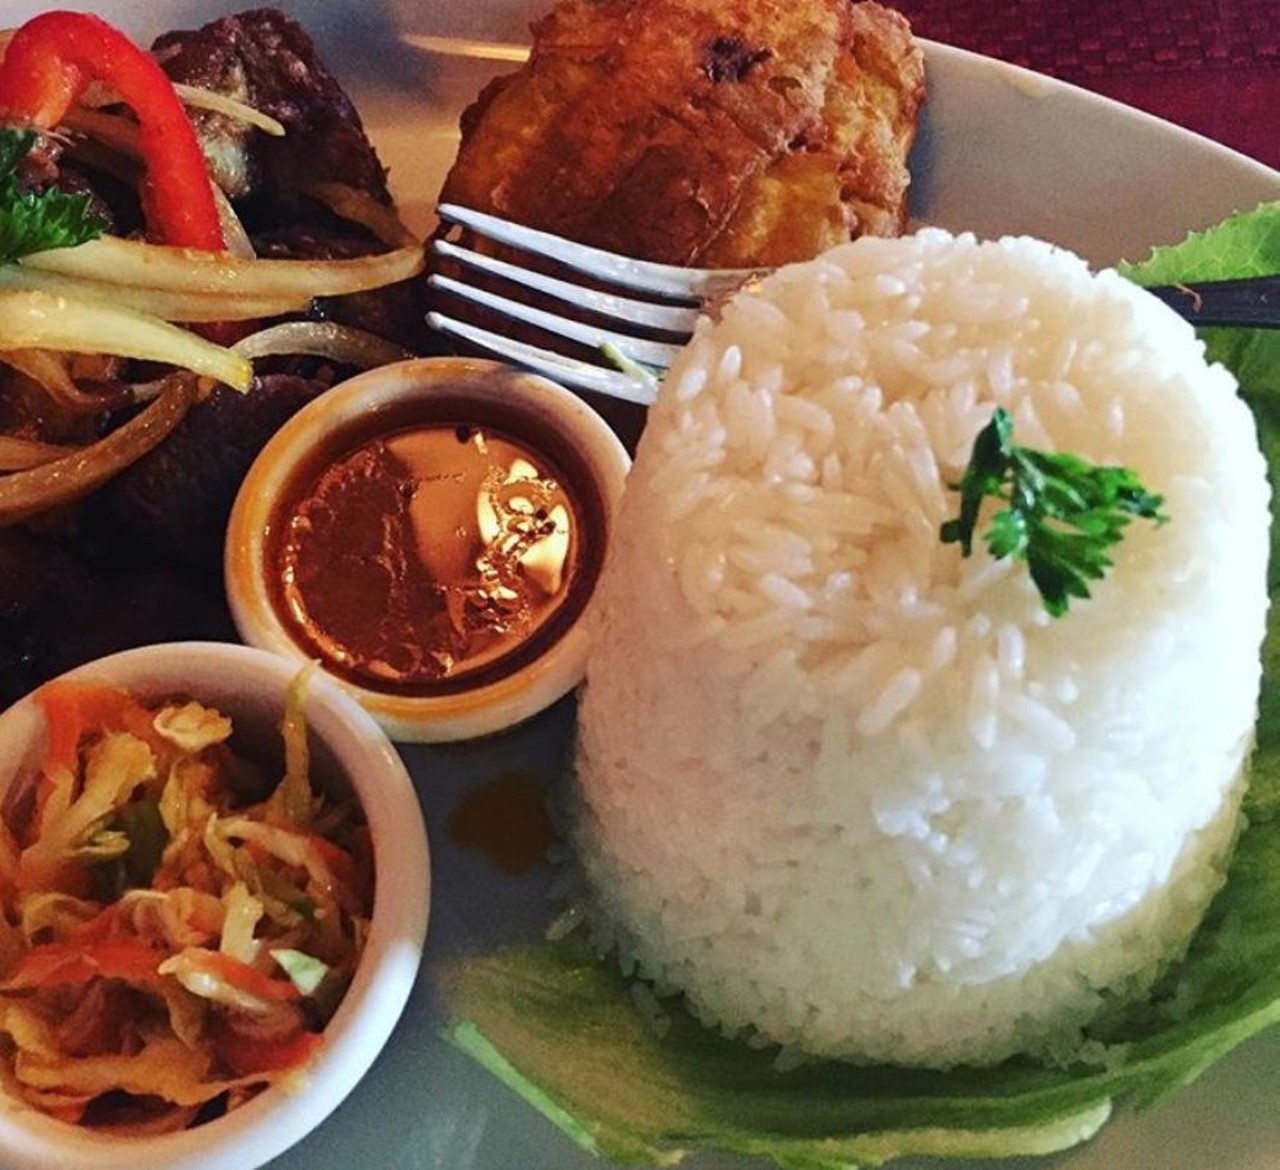 Cafe Kreol and Bar  
2340 W. Oak Ridge Road, 407-852-9723
This Haitian joint&#146;s menu feels more like eating over at friend&#146;s house. There are only a handful of options, but they change every day between classics like griot and tasso kabrit.
Photo via krypto9095/ Instagram